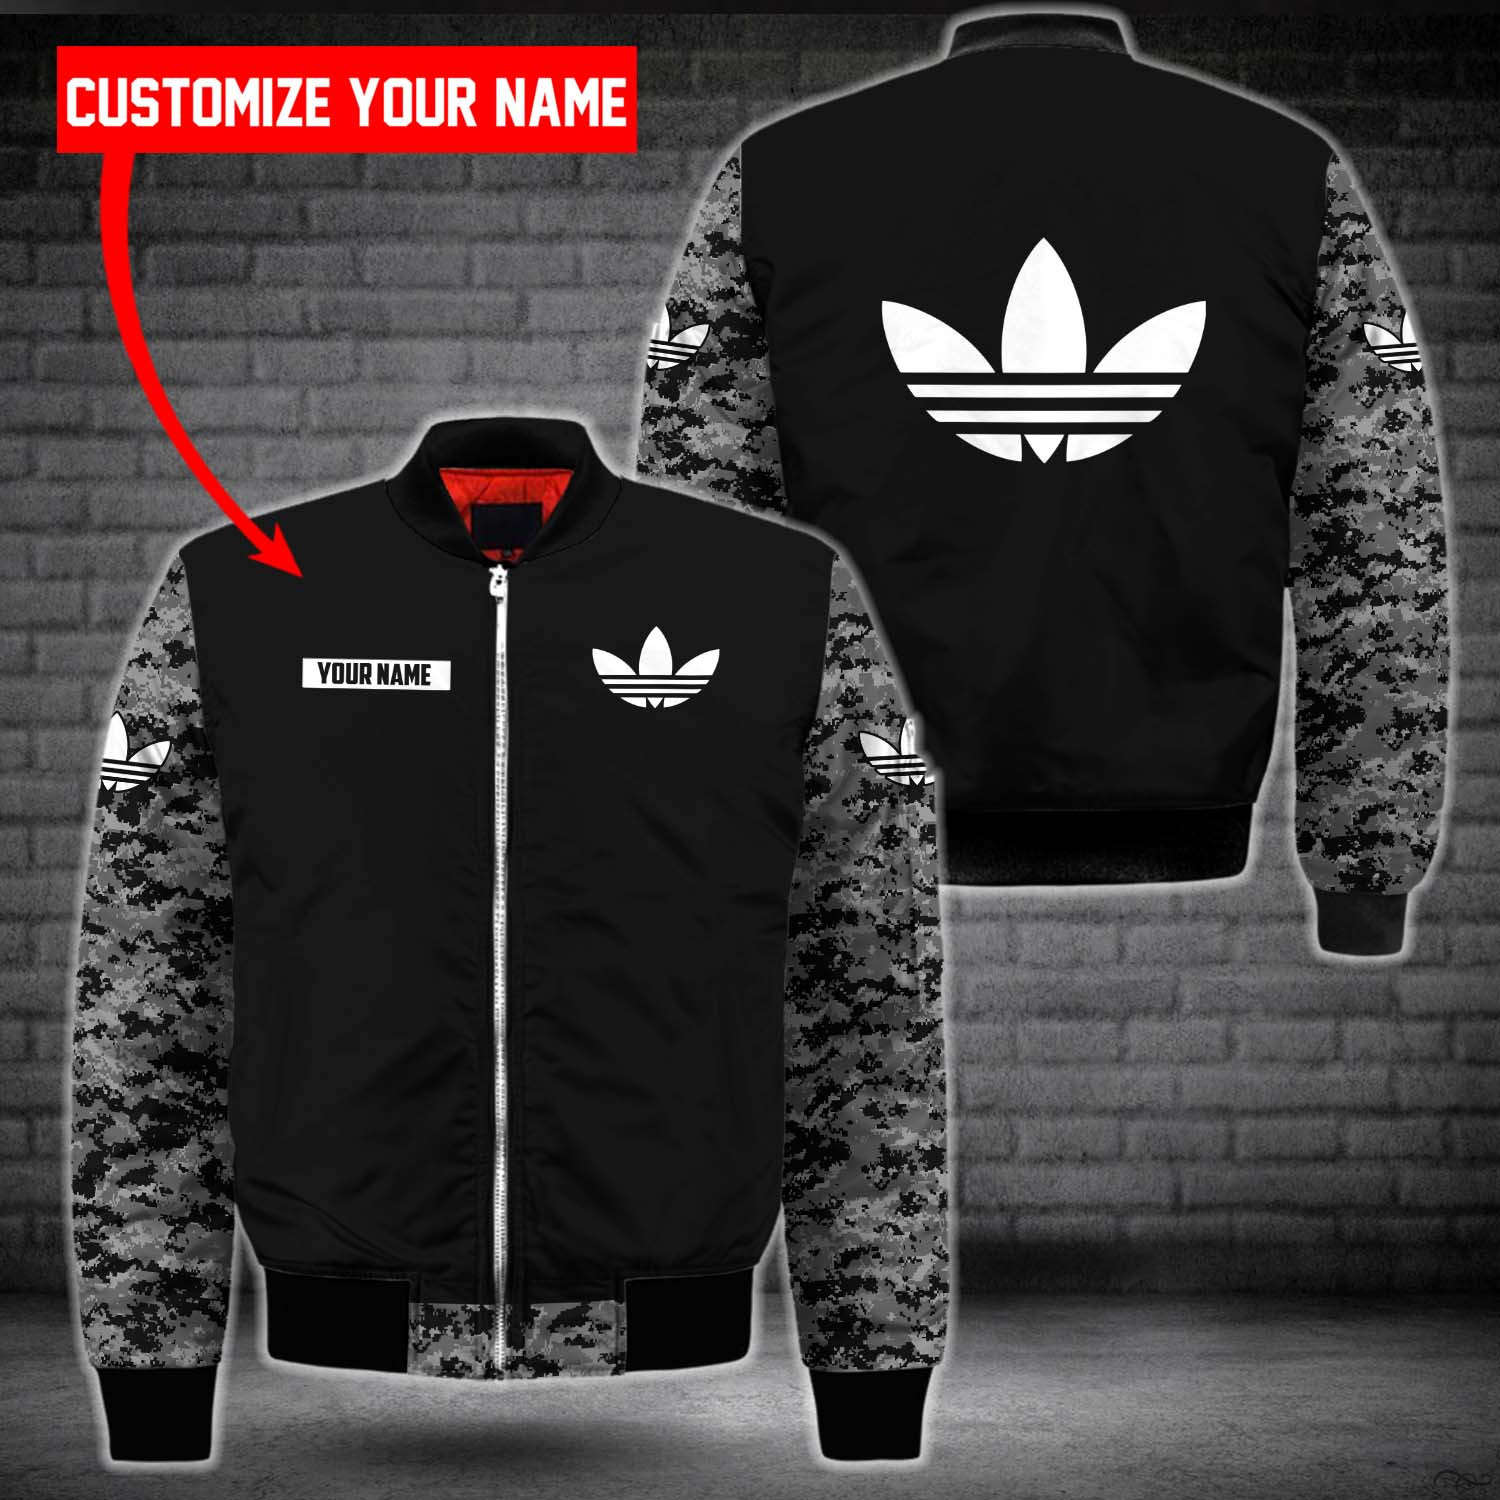 ADD Customize Name Bomber Jacket ADD5188 Ver 23 Bomber